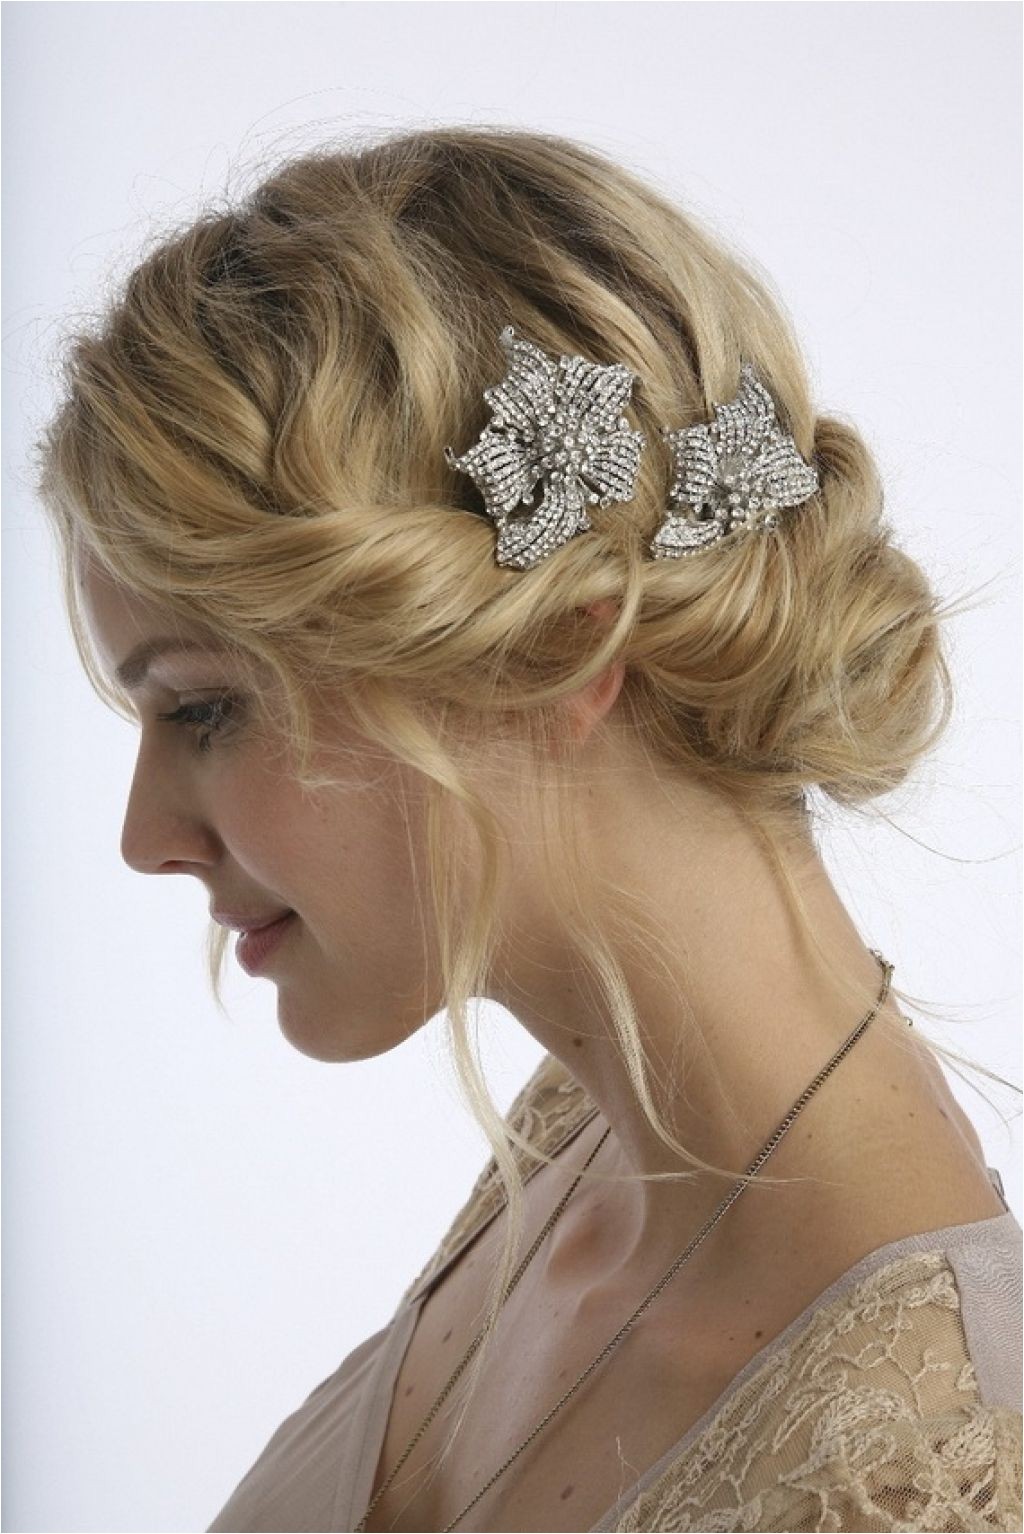 vintage wedding hairstyles for medium length hair vintage hair wedding hairstyles updos popular long hairstyle idea